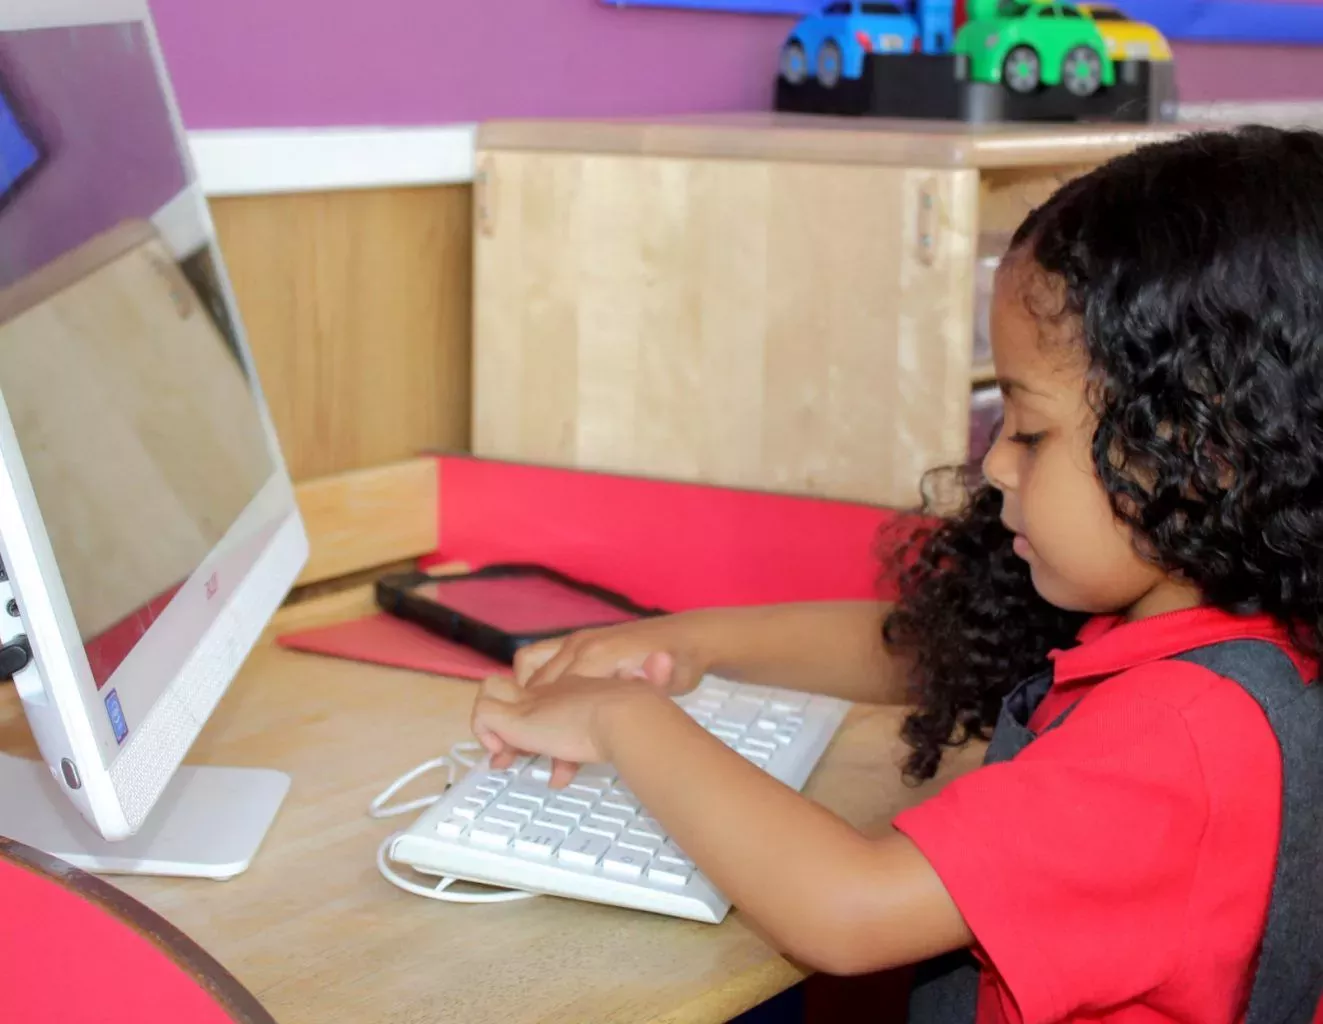 We introduce children to computers and basic Maths and English software in pre-school, so that by the time they go to school, they are familiar with using a mouse and keyboard.